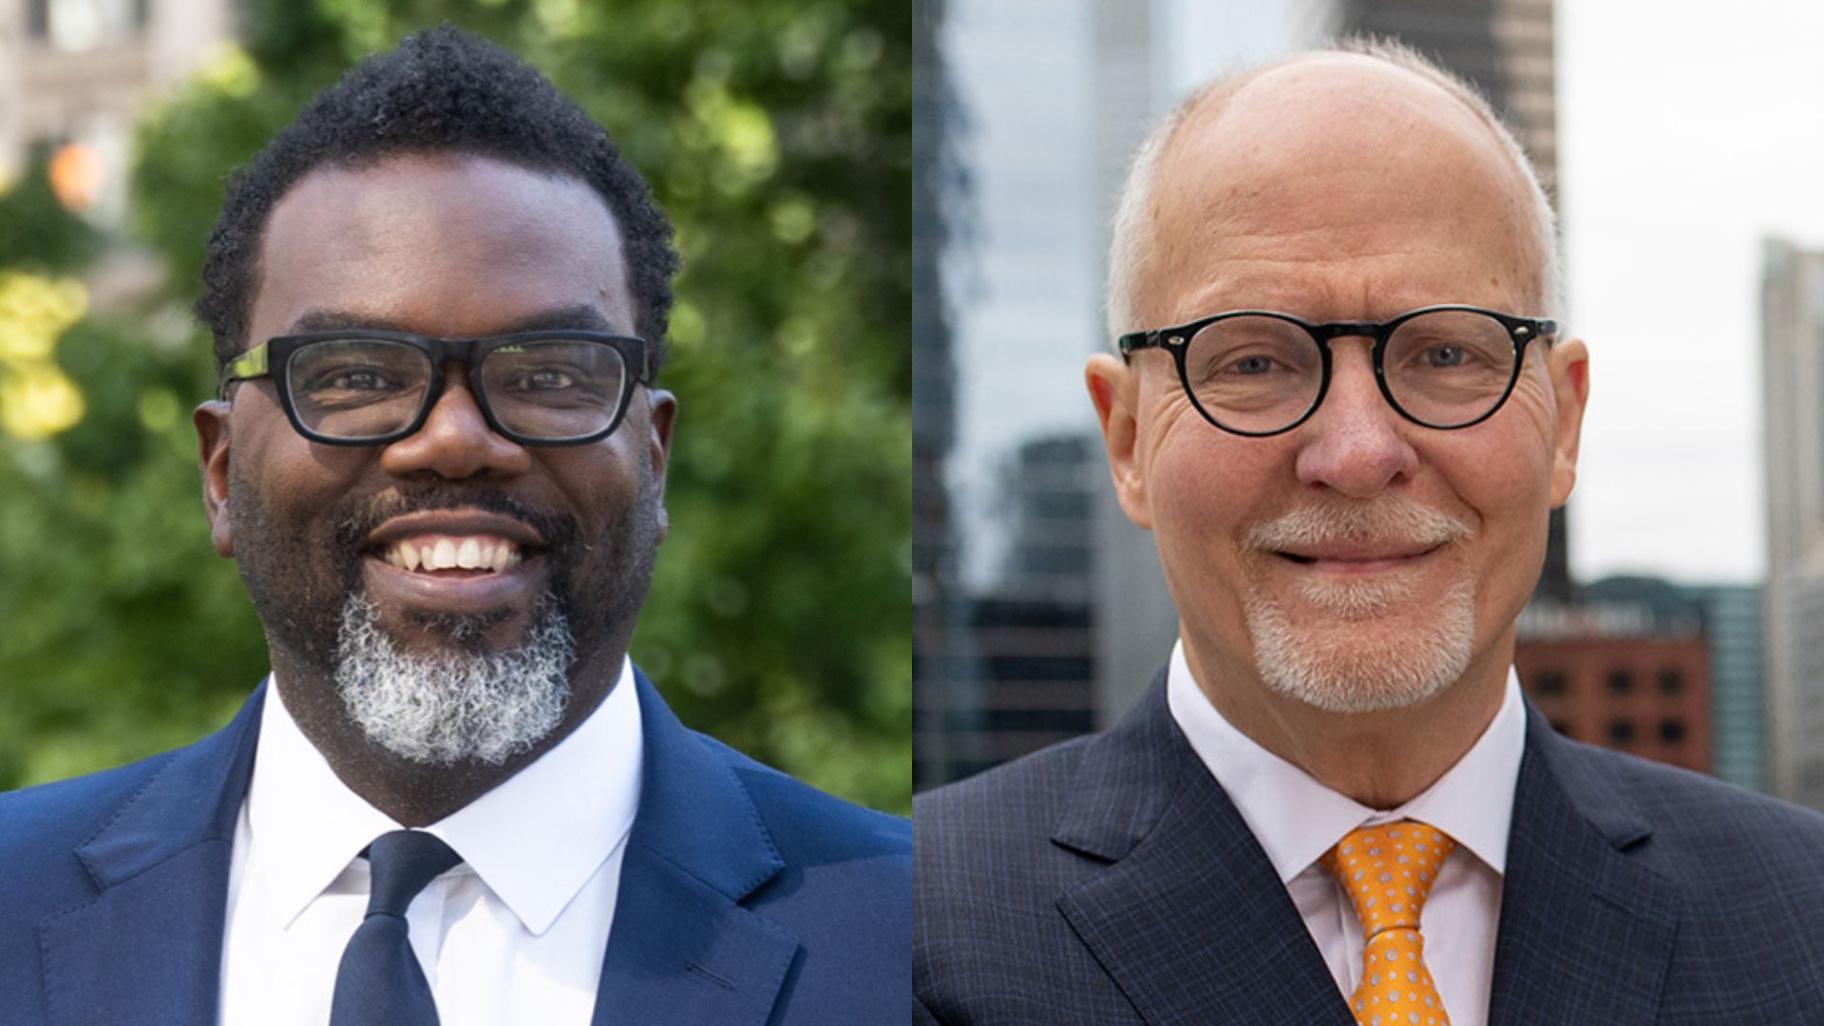 Johnson, Vallas Both Talk a Green Game. Here’s a Look at the Candidates’ Environmental Plans | Chicago News